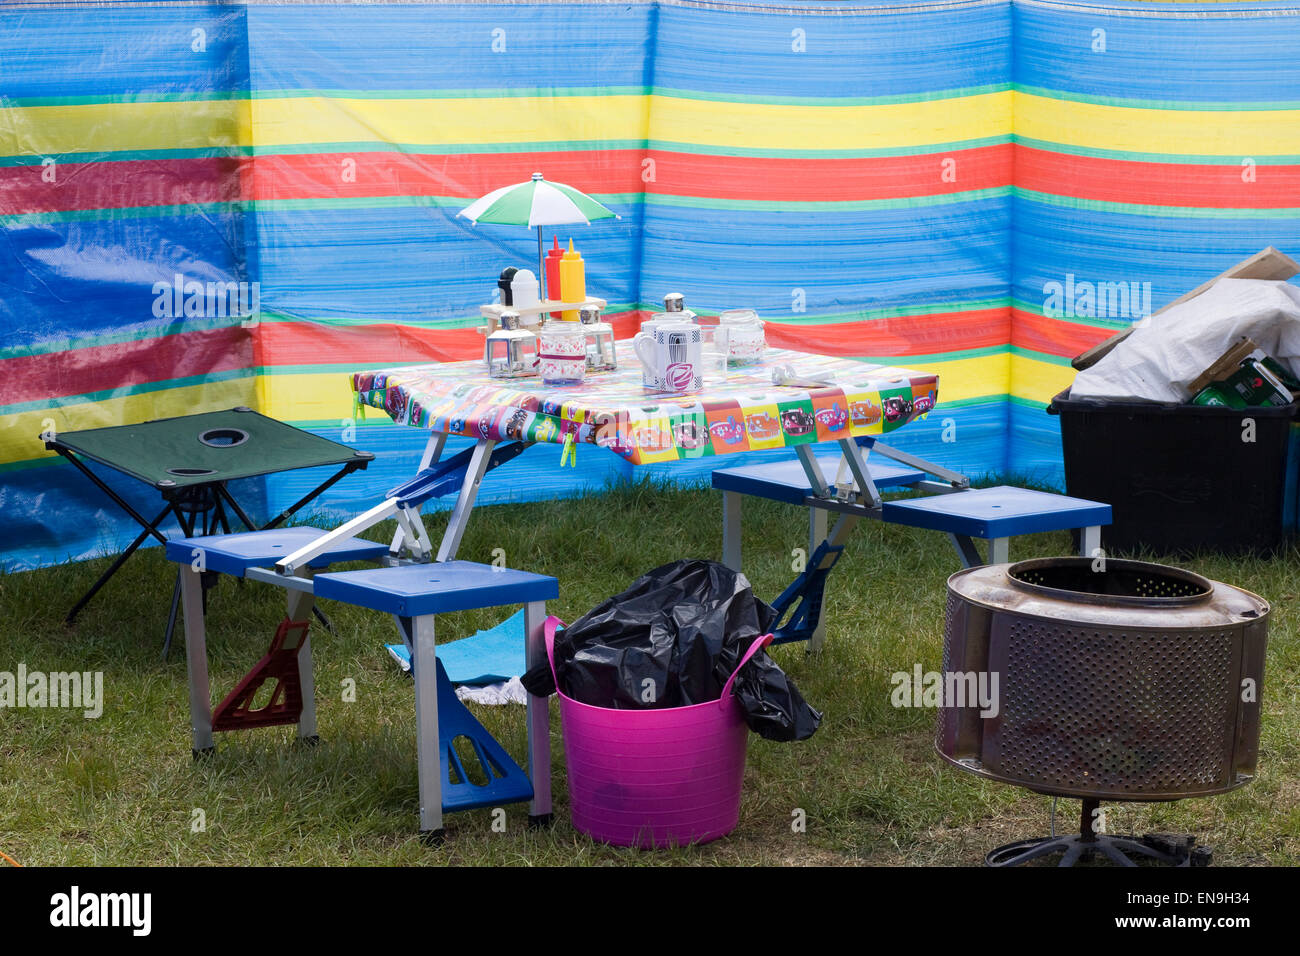 Camping ground at a Volkswagen Show in england Stock Photo